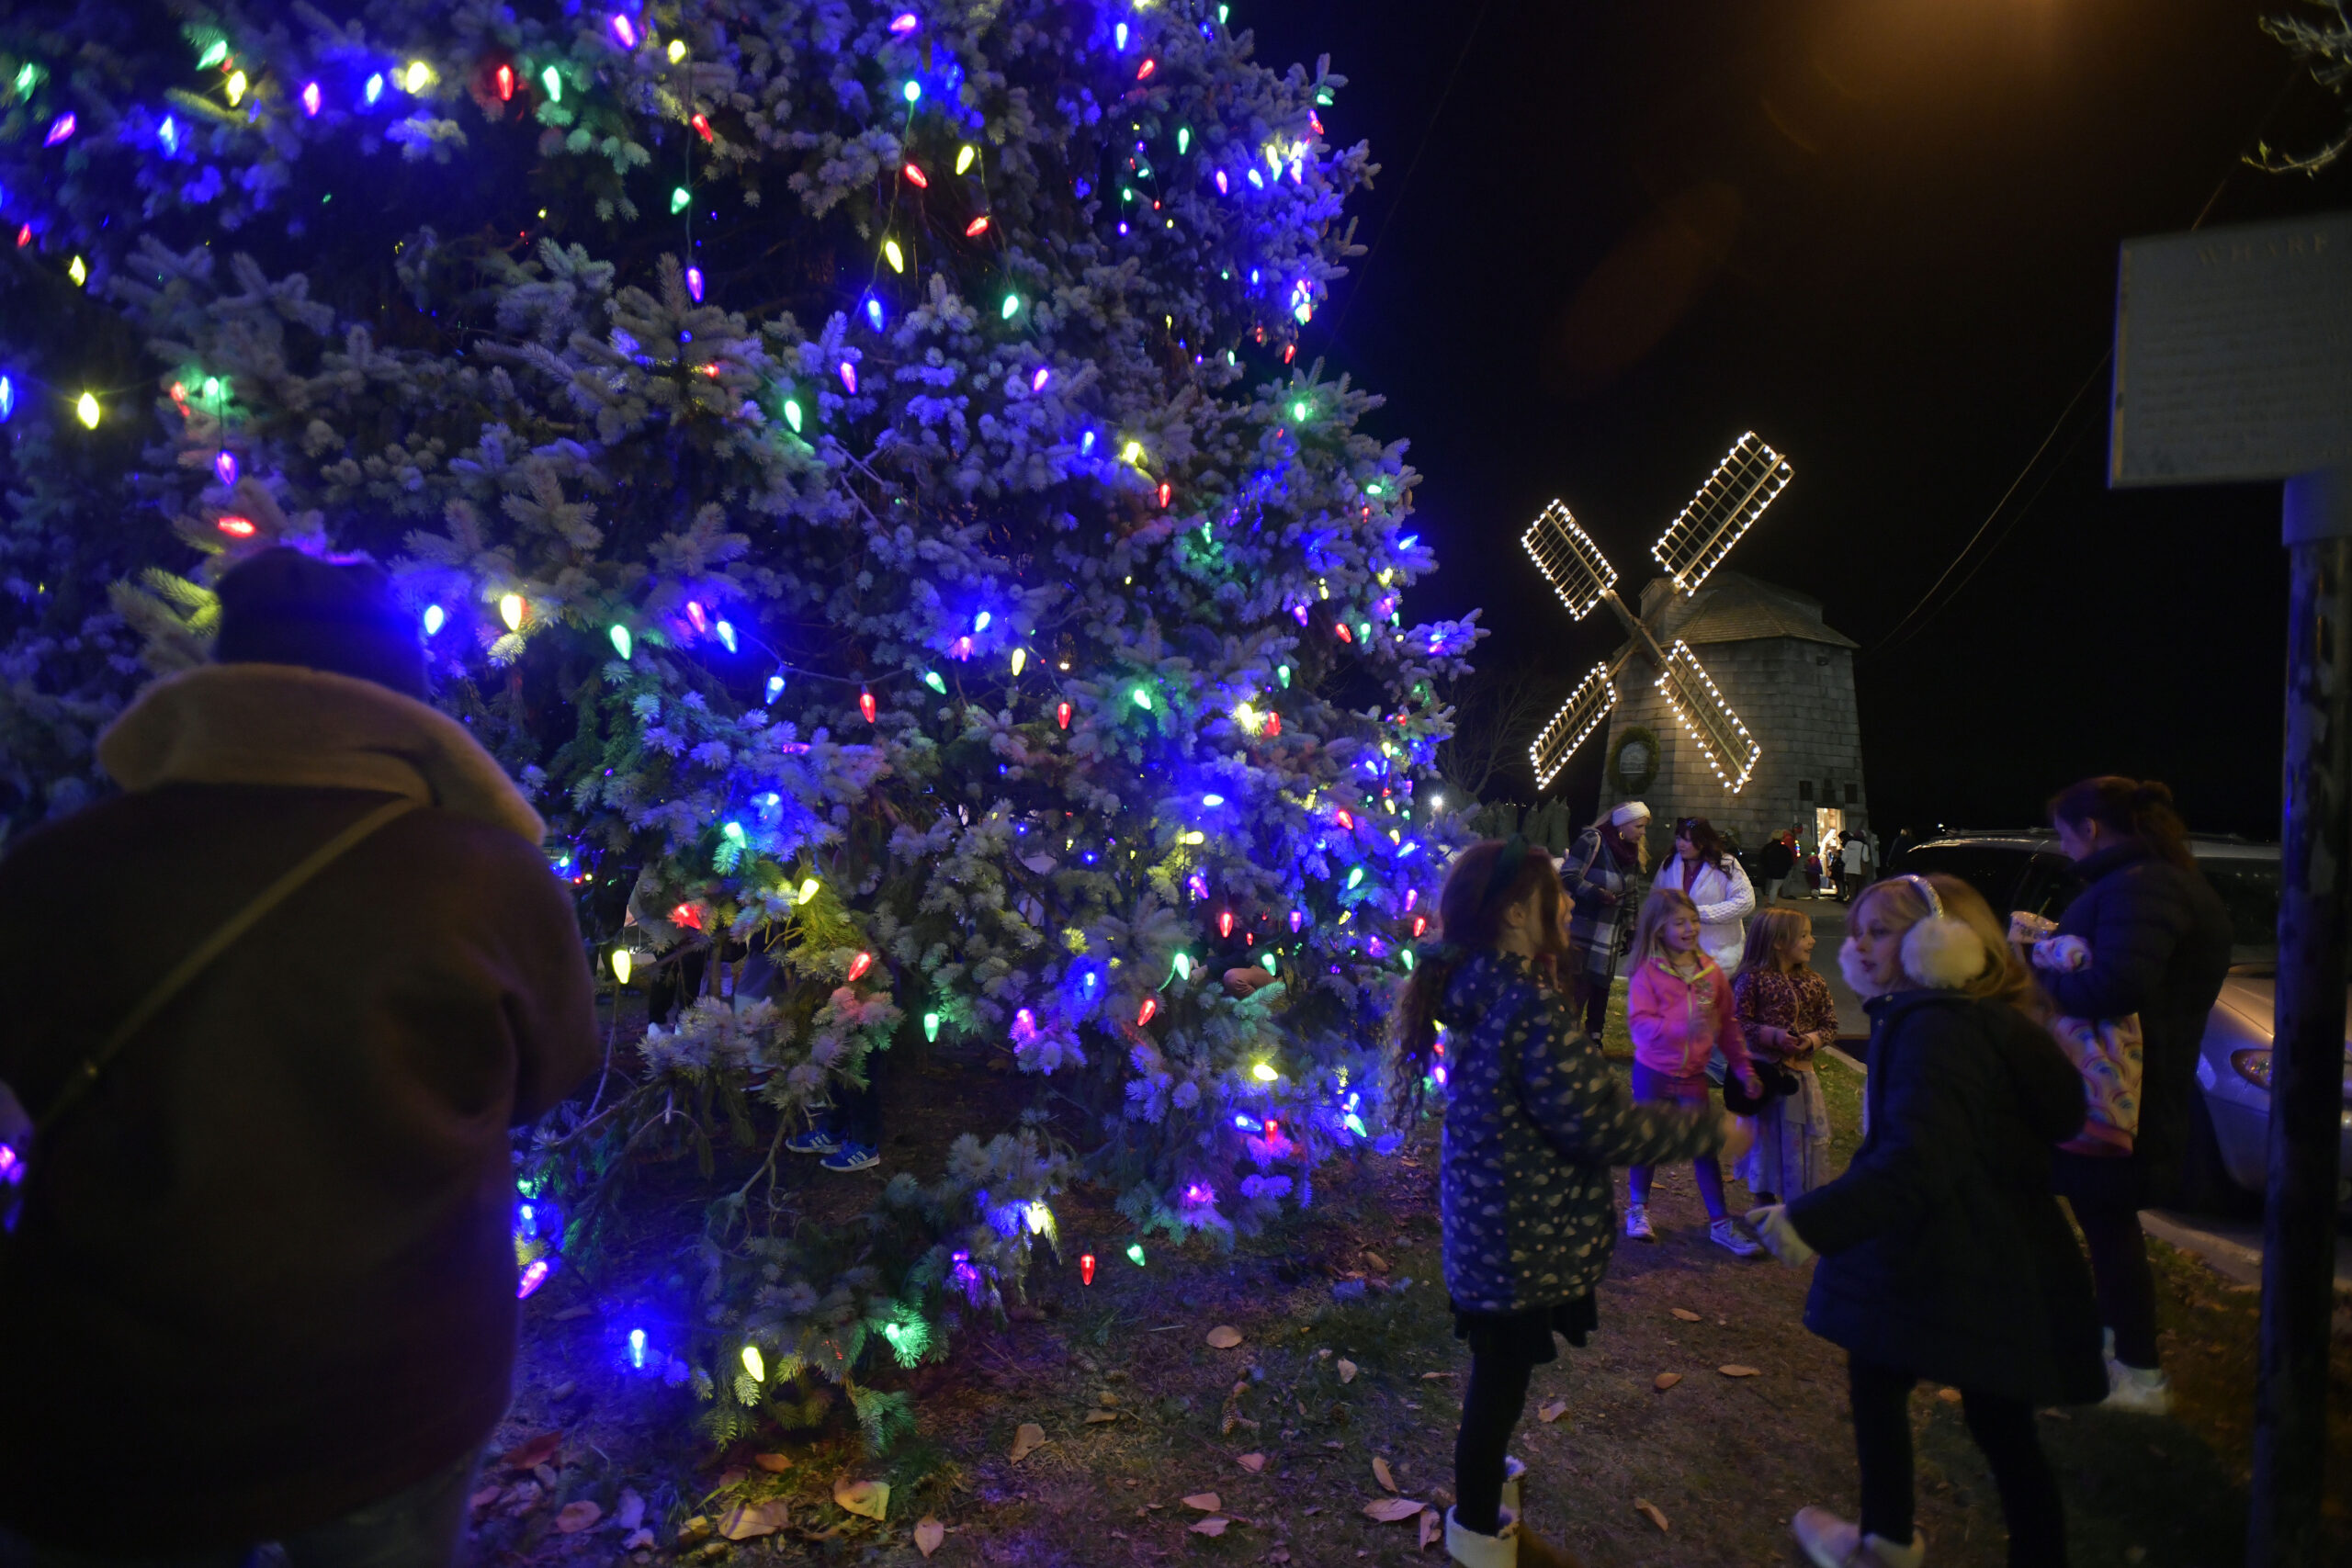 The tree is lighted in Sag Harbor on Friday.